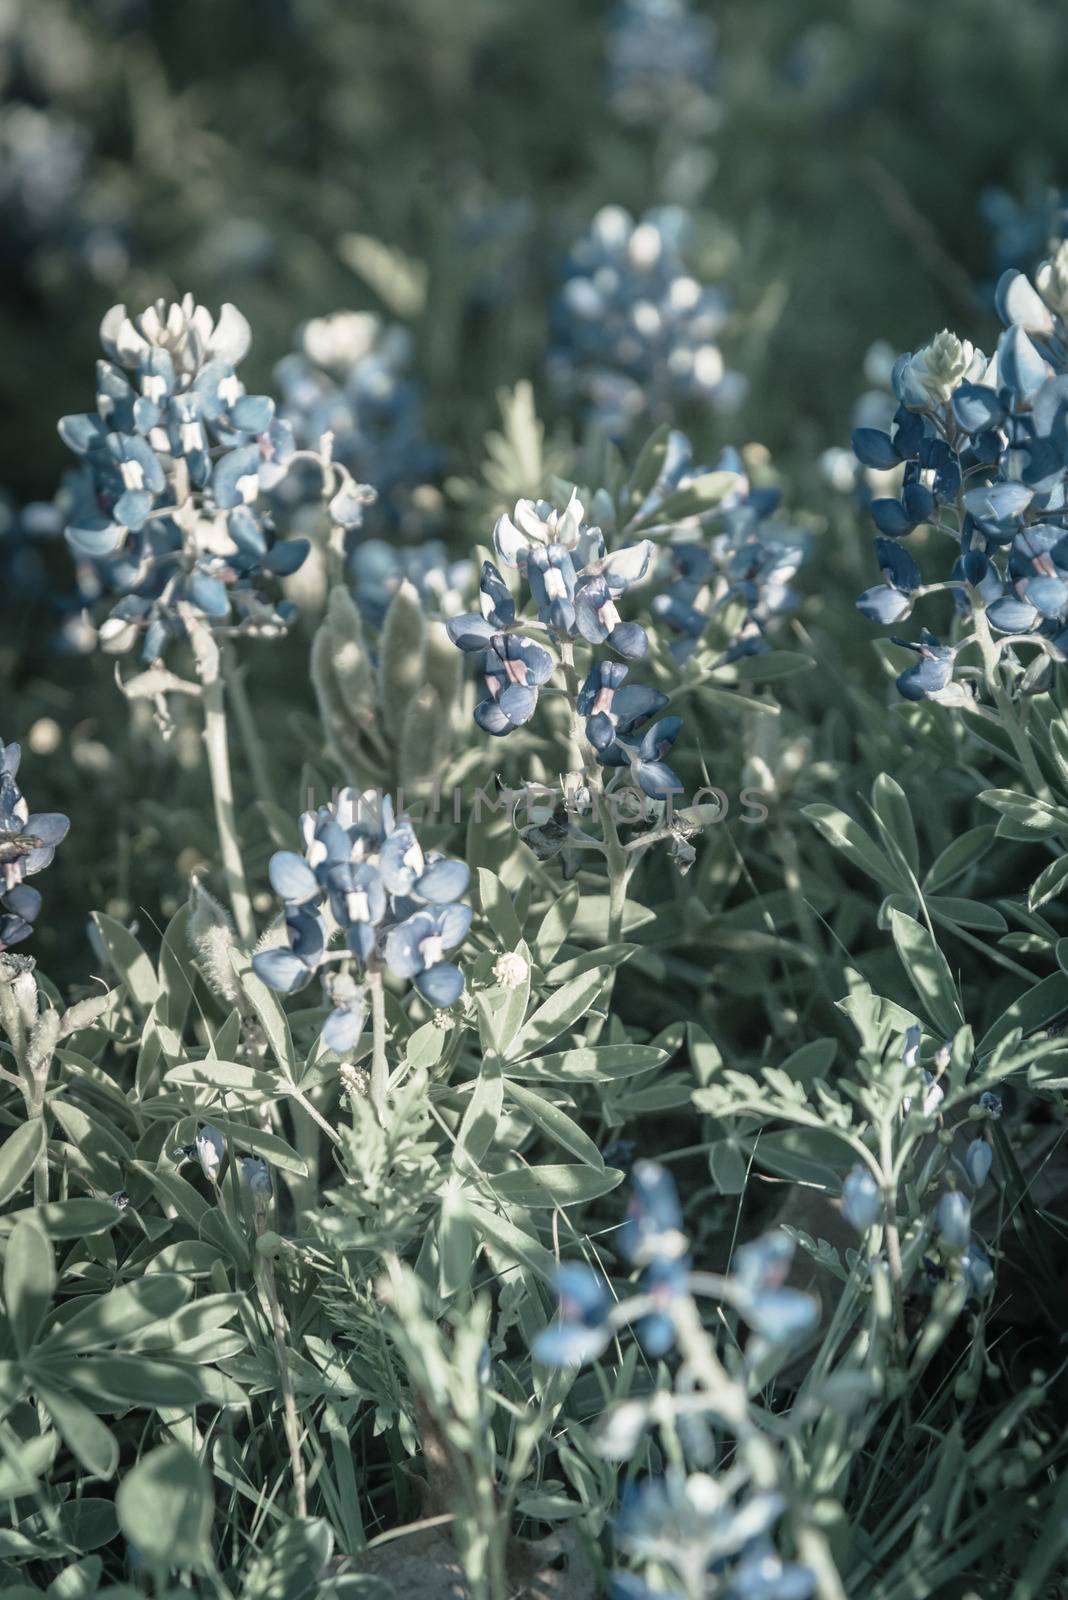 Filtered image blooming Bluebonnet wildflower at springtime near Dallas, Texas by trongnguyen